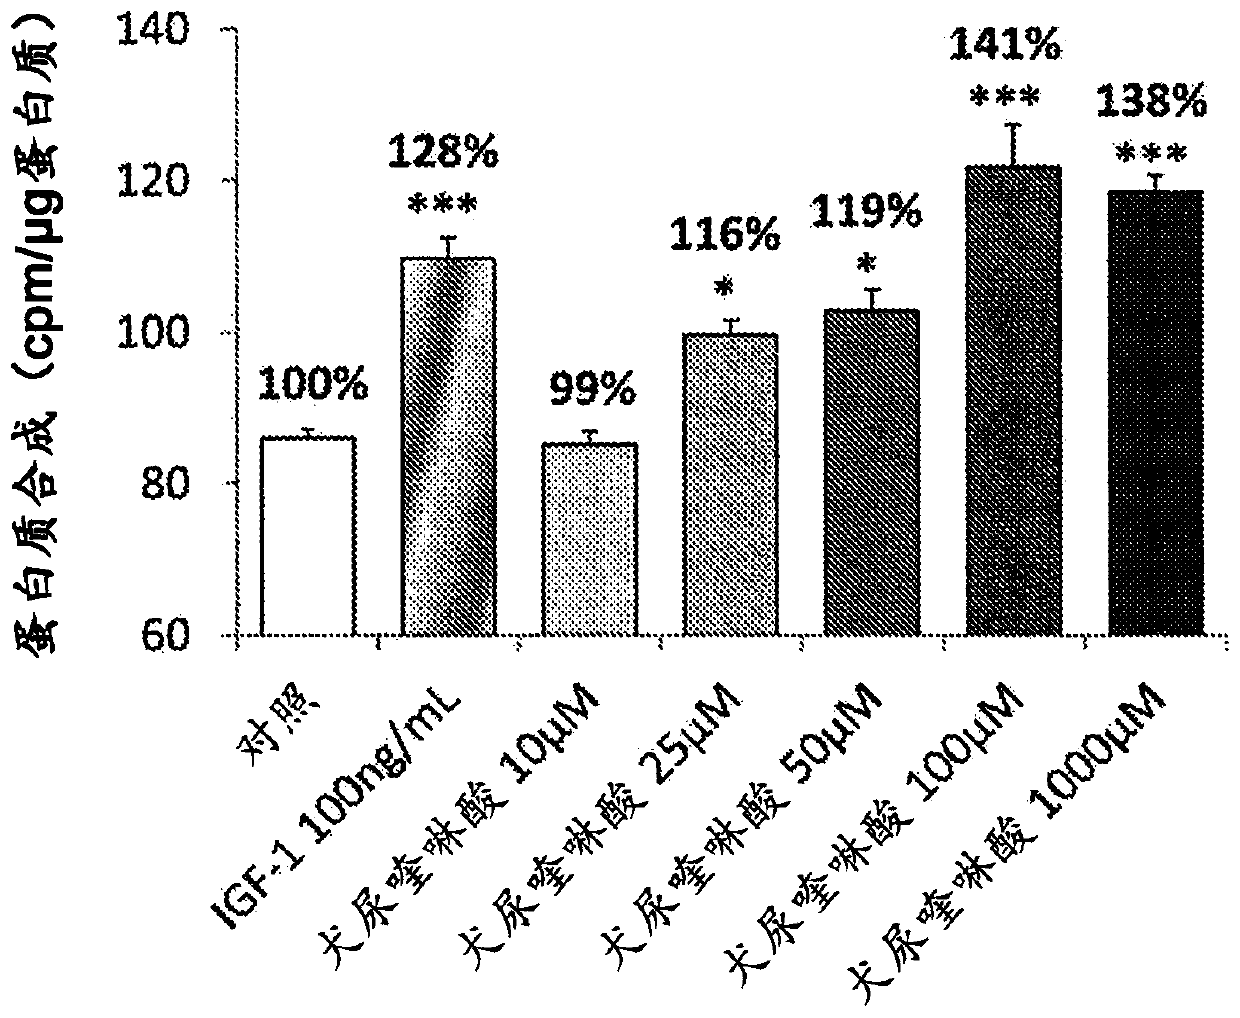 Use of tryptophan metabolites for treating muscle atrophy